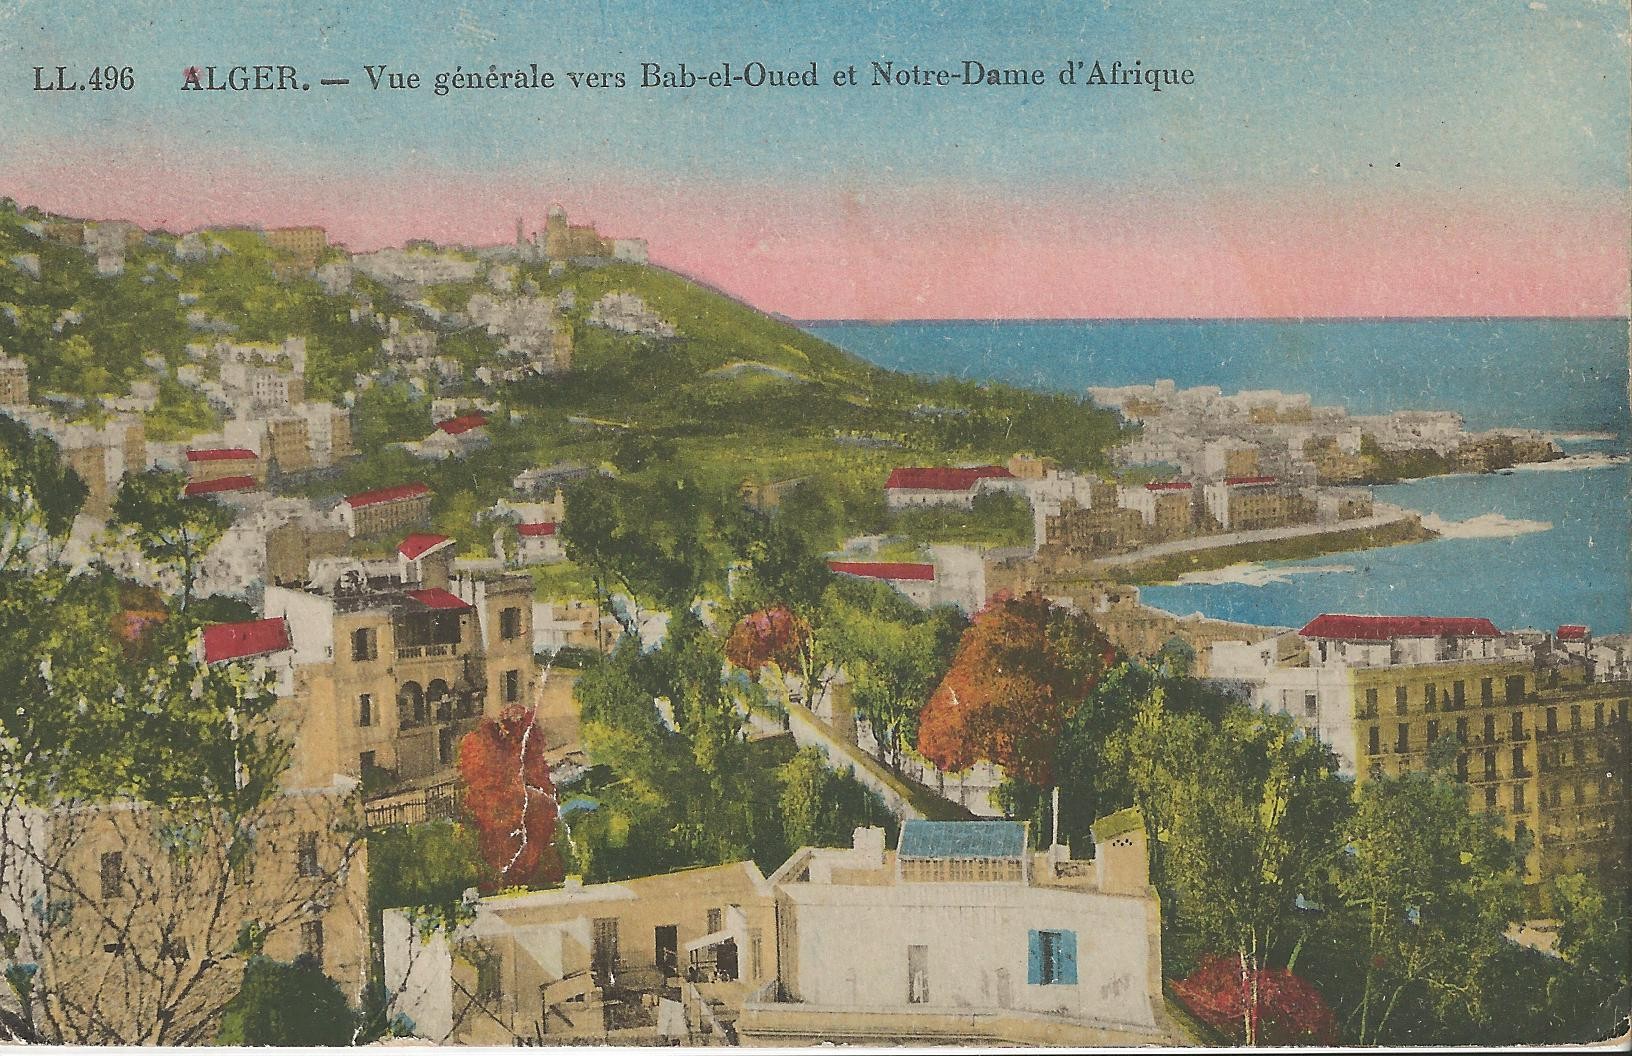 Post Card to Sister Ingrid from North Africa